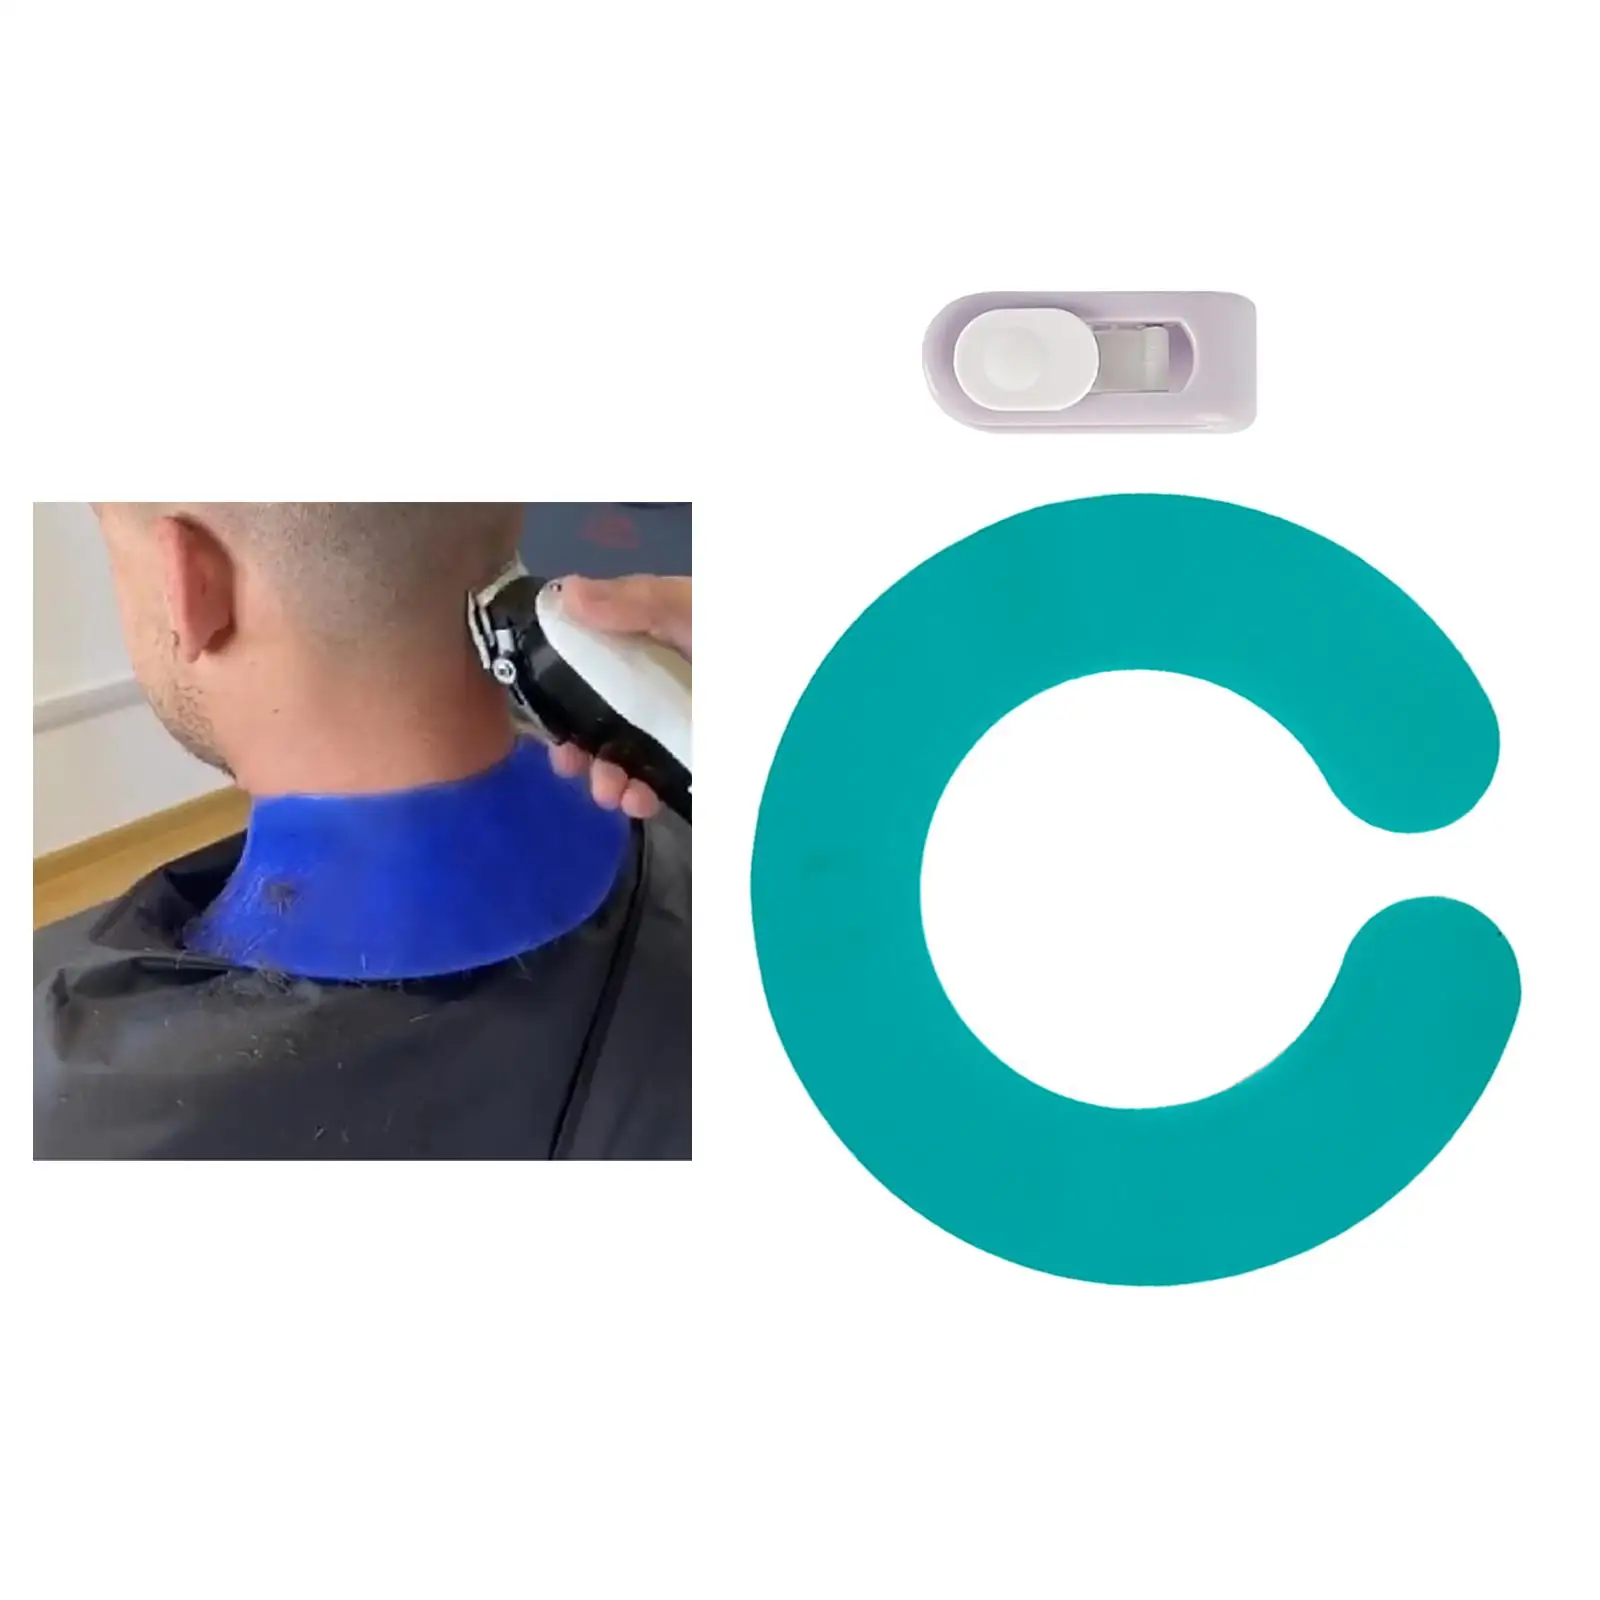 Silicone Stylist Cutting Collar with Buckles Adjustable Guard Tool Shawl Capes for Barber Hairdressing Salon Women Men